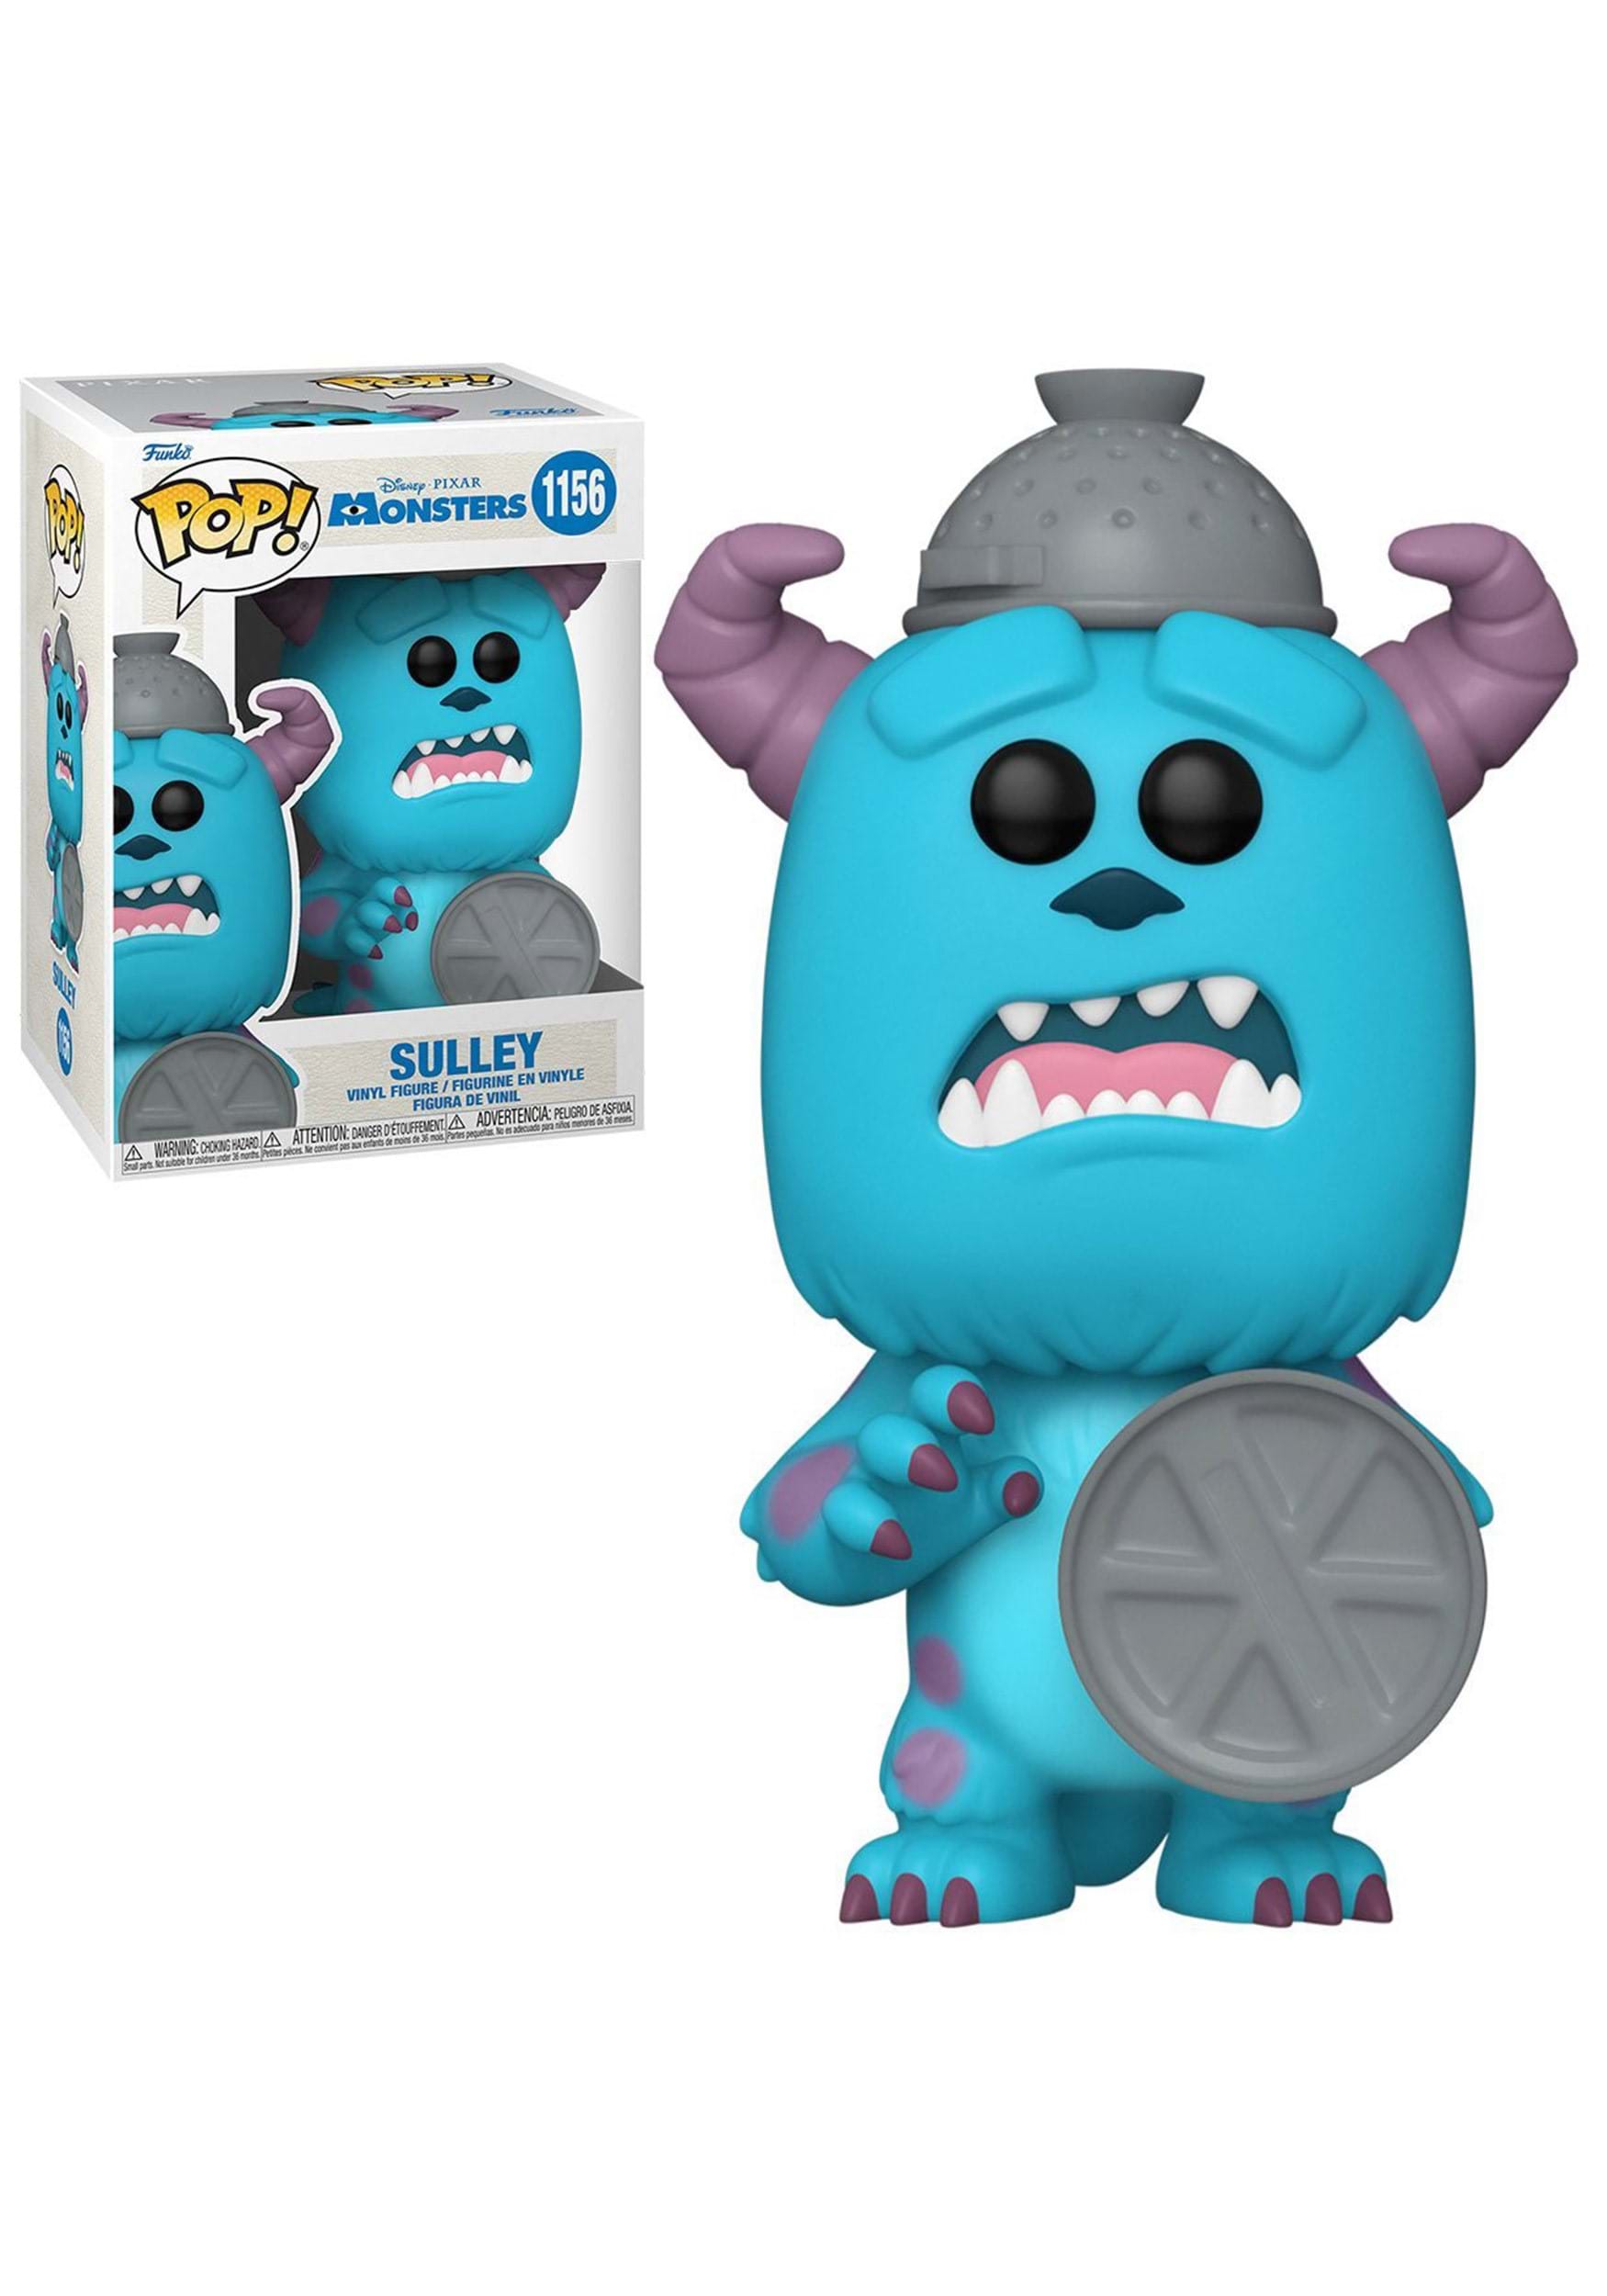 Funko POP! Disney: Monsters Inc 20th- Sulley with Lid Figure